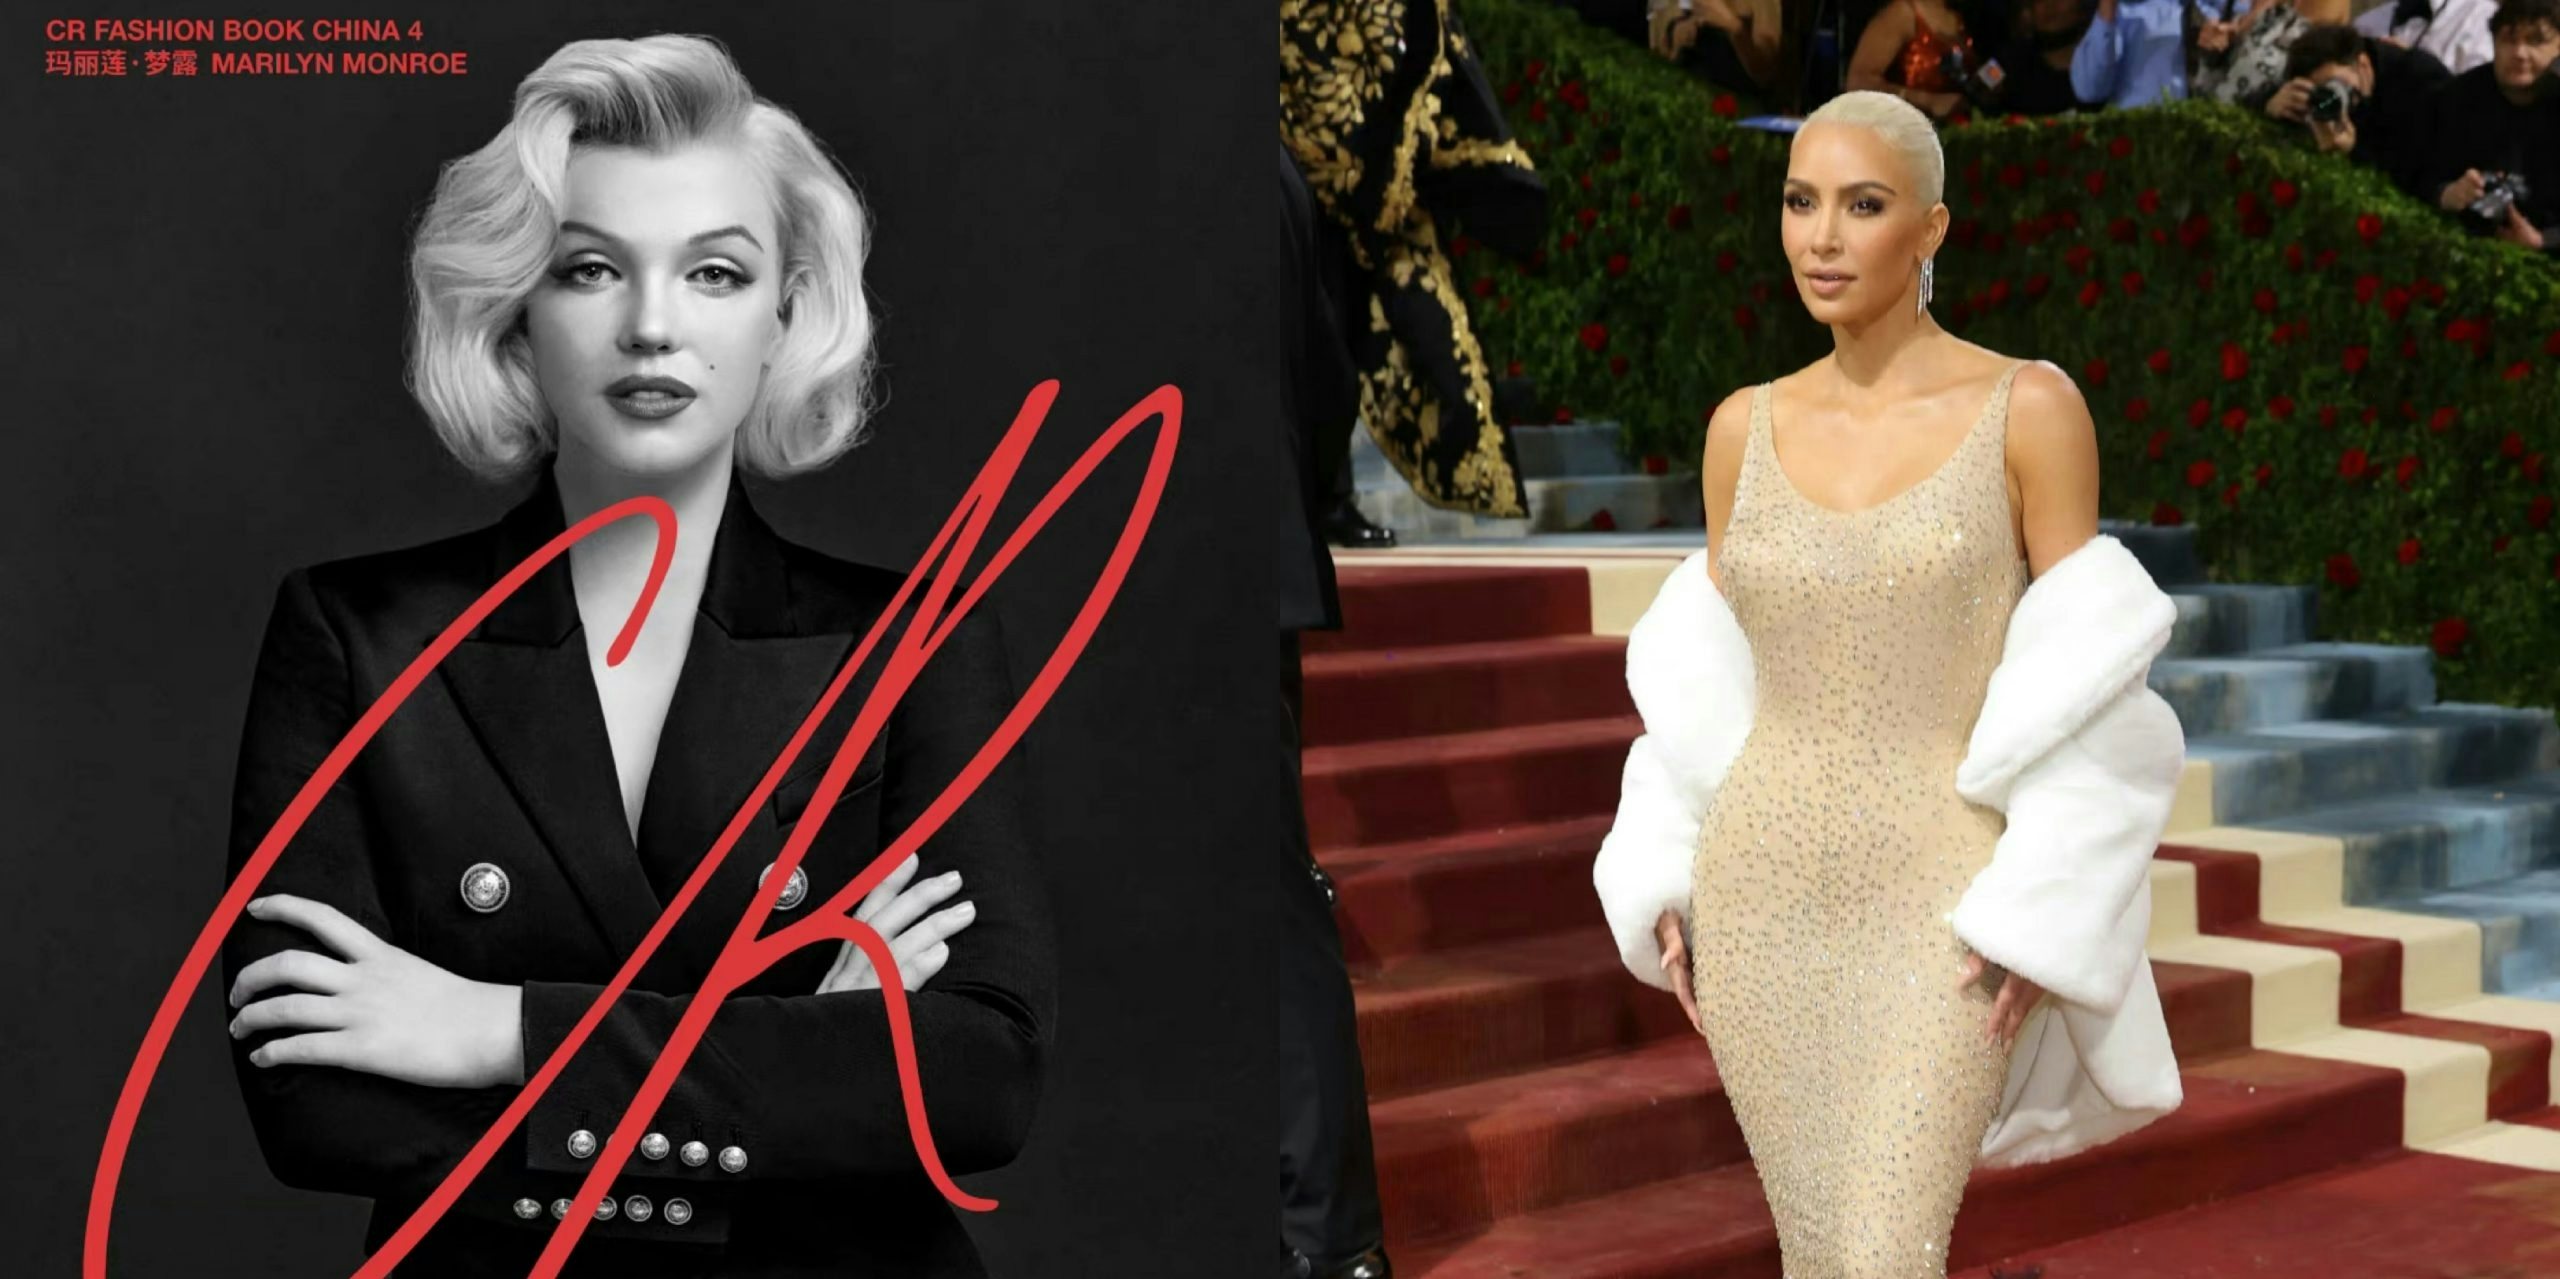 Even though it’s been 60 years since the death of the Hollywood icon Marilyn Monroe, she is still being made to sell luxury. Photo: Weibo